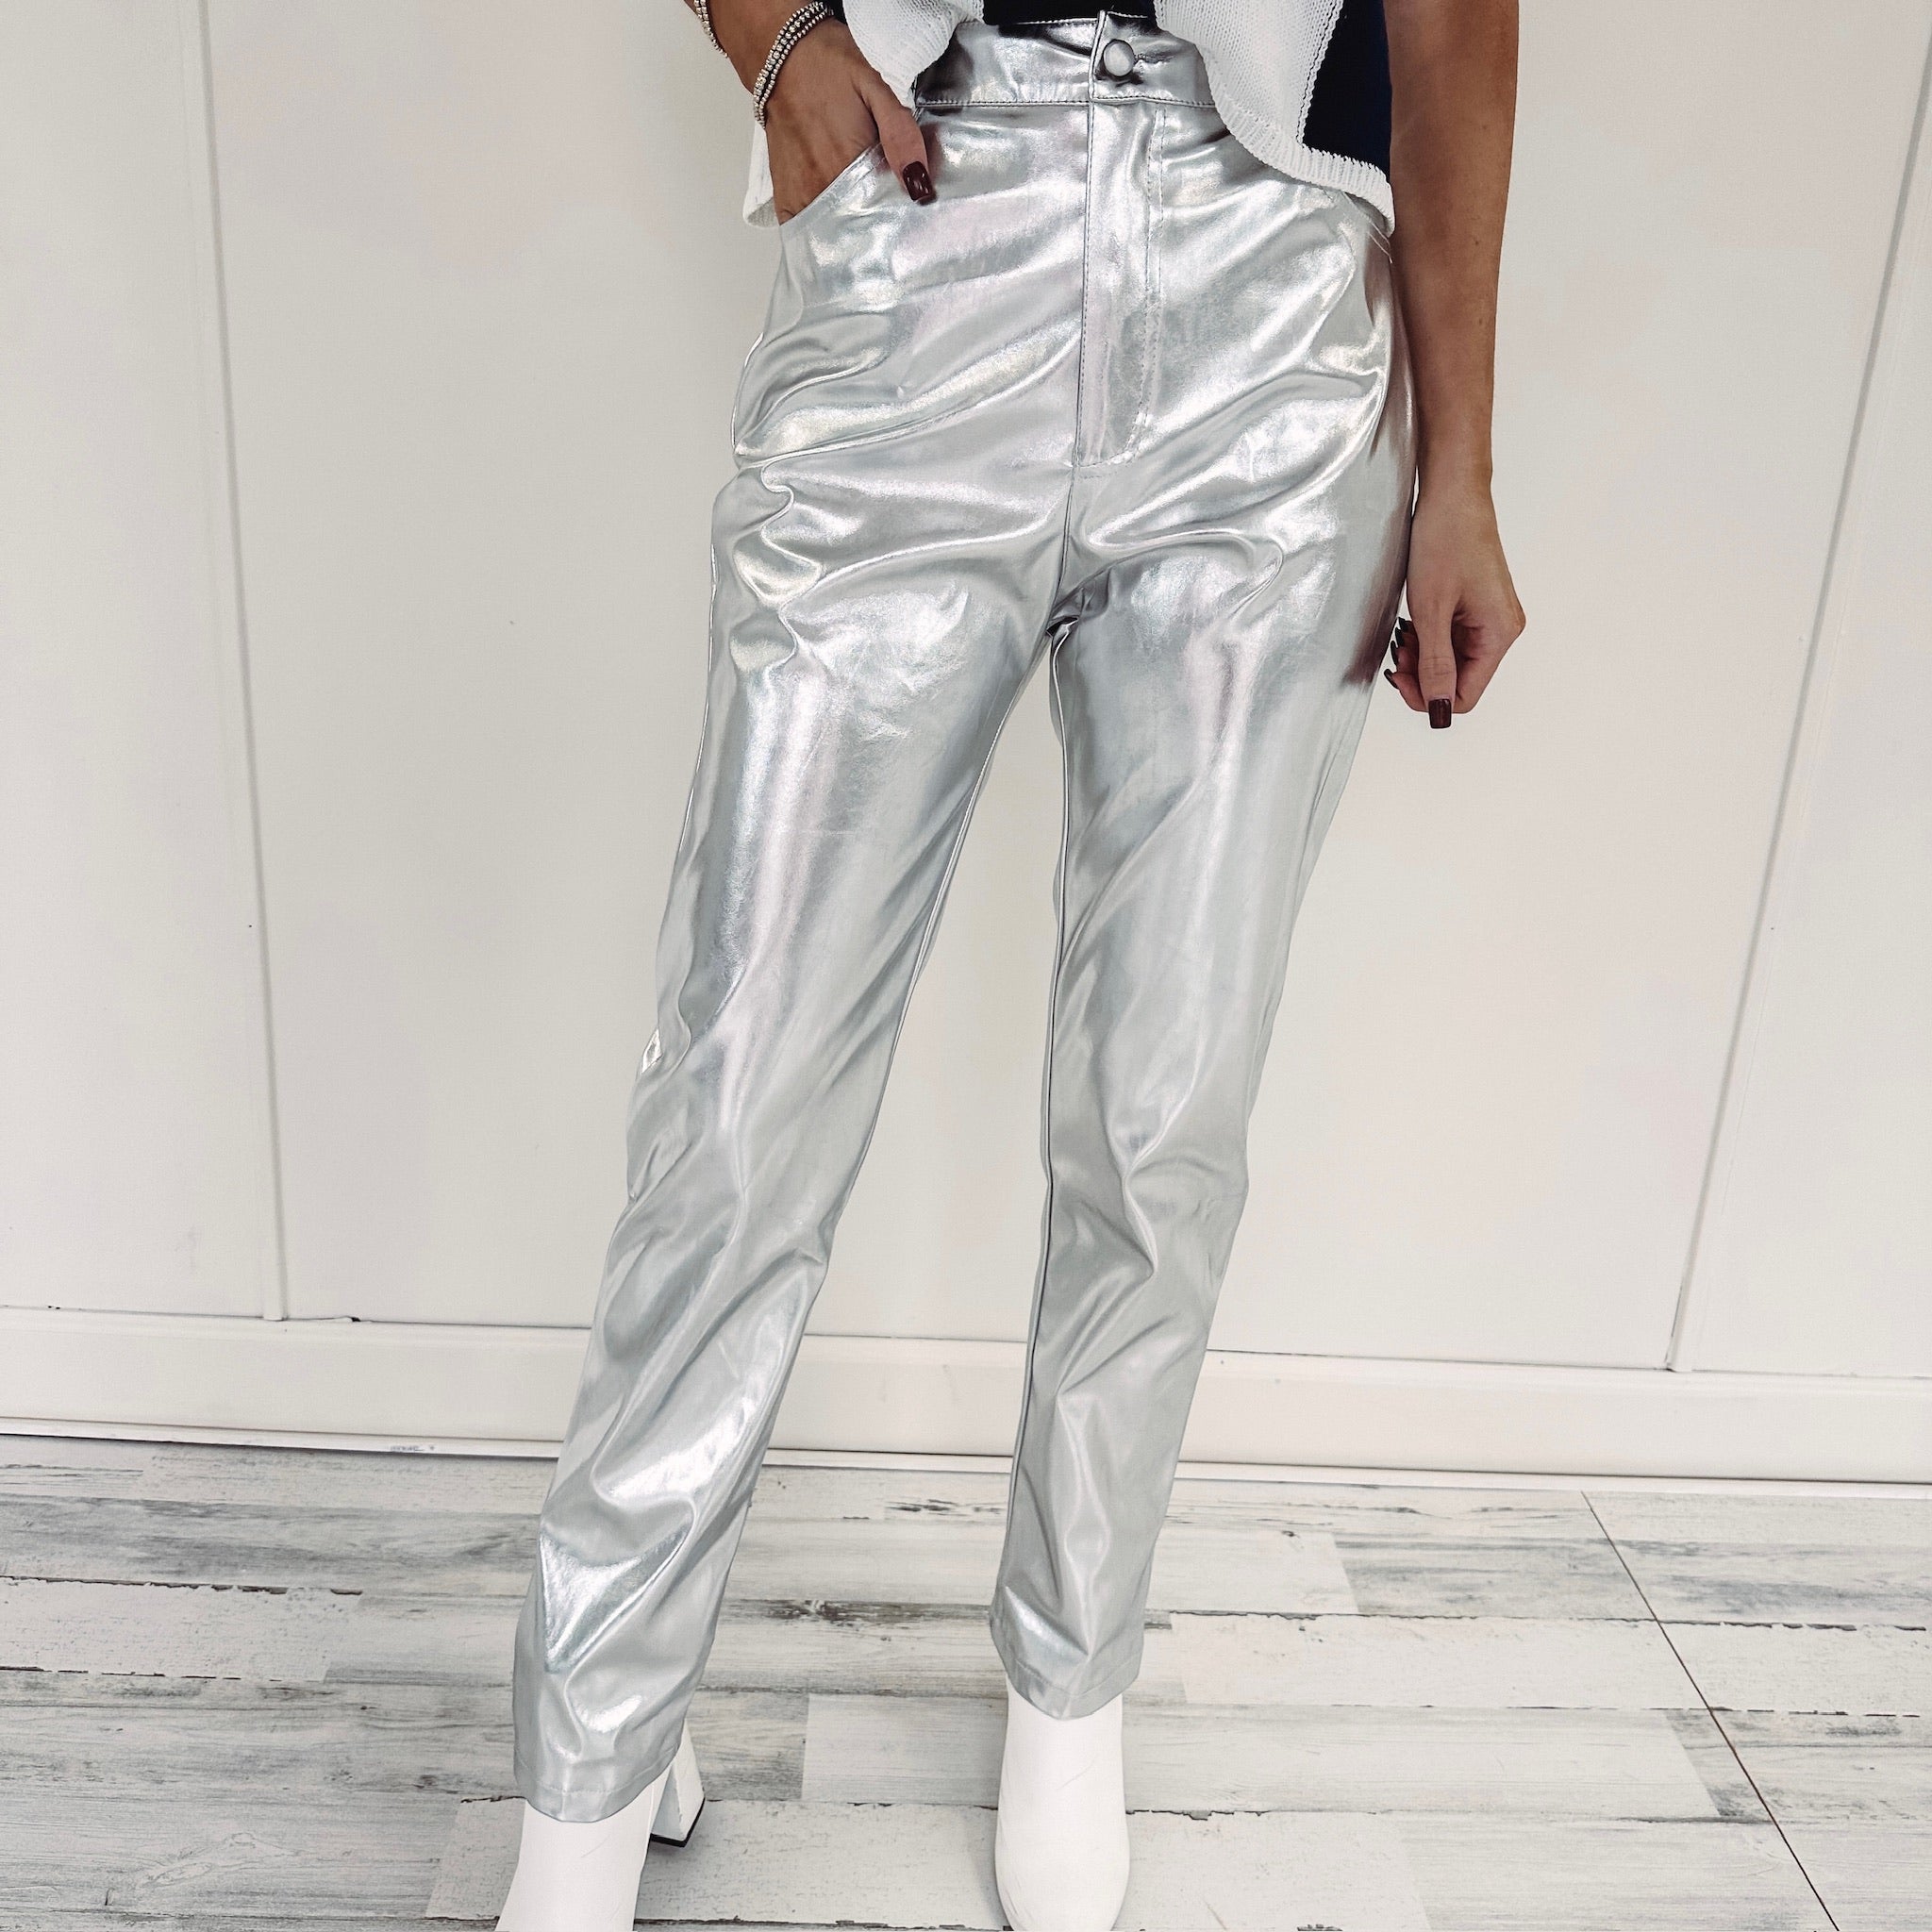 Amy Lynn Lupe trouser in metallic mint green | ASOS | Metallic trousers, Metallic  pants, Metallic pants outfit